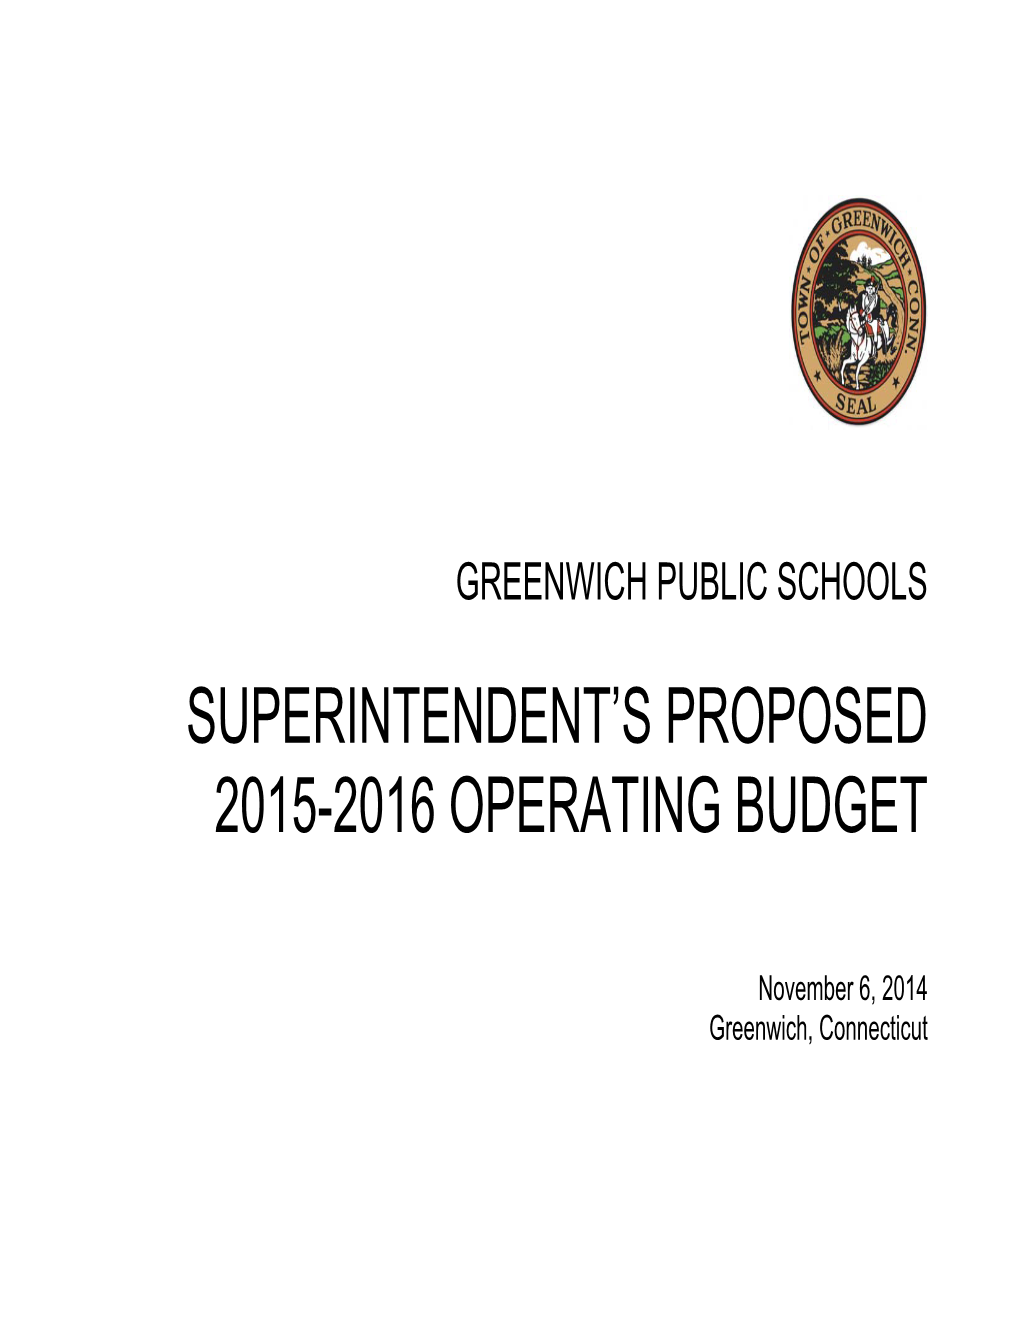 Superintendent's Proposed 2015-2016 Operating Budget